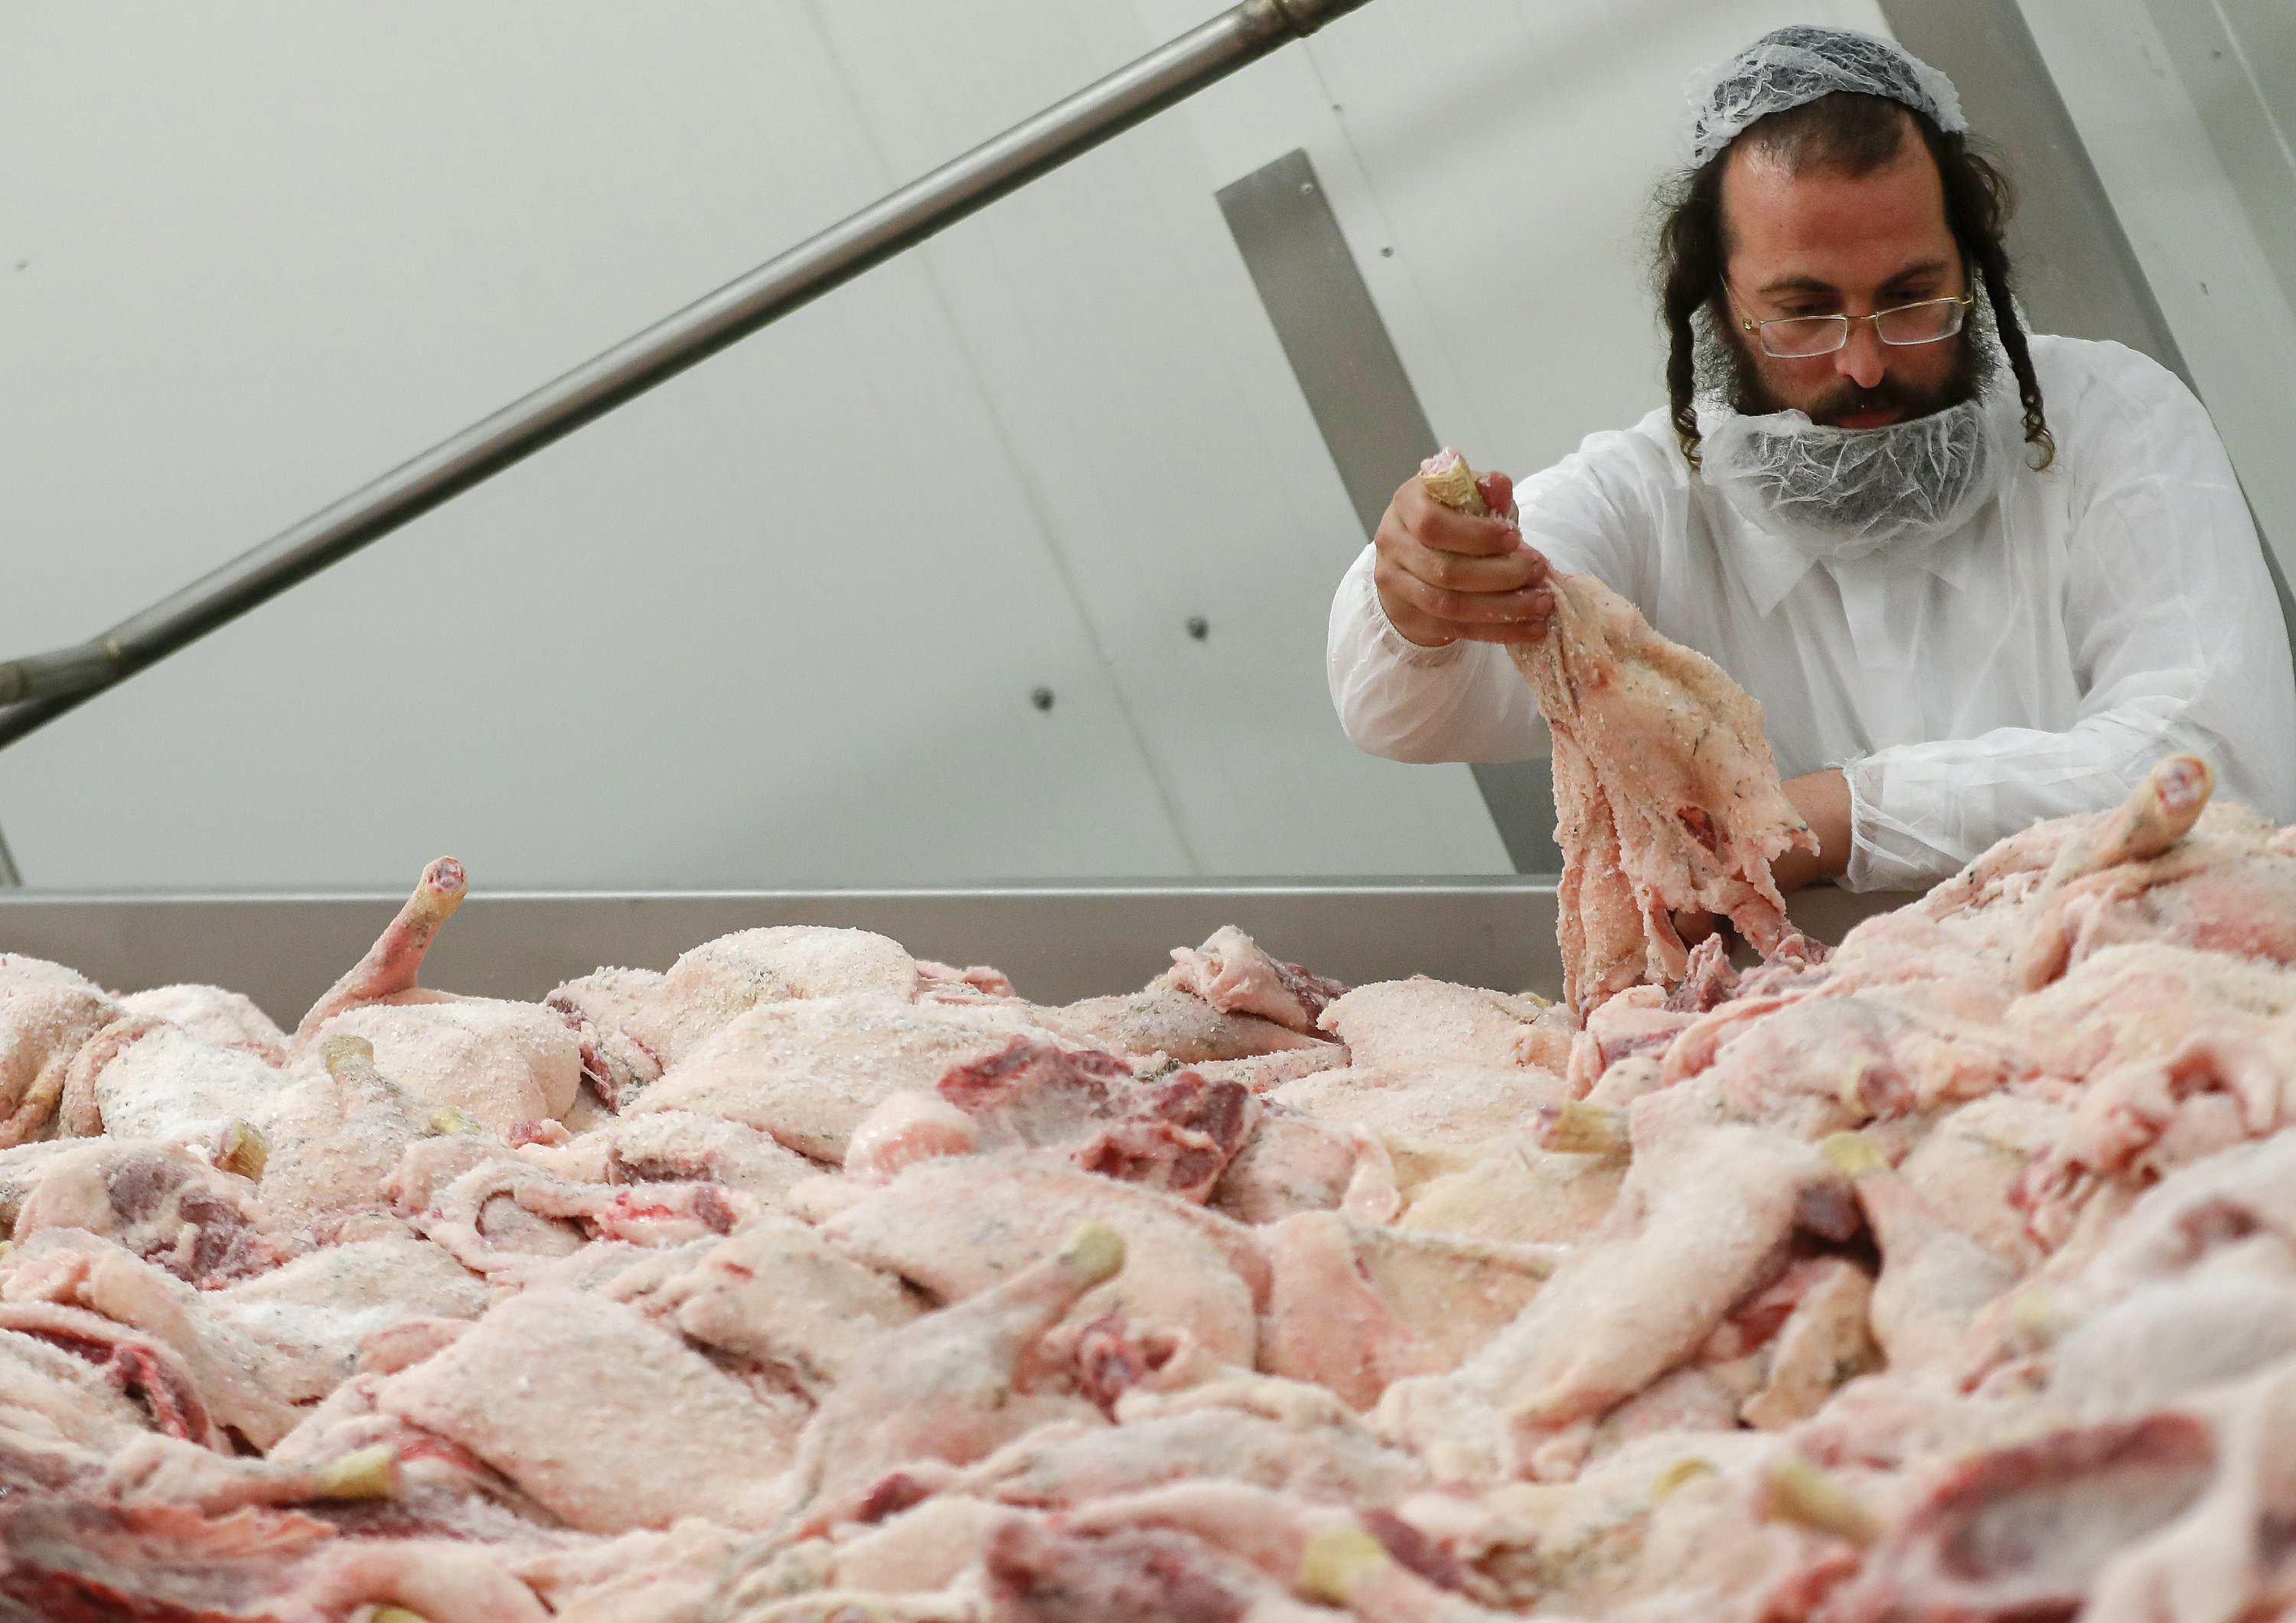 Decision brings kosher butchery new business, old fears